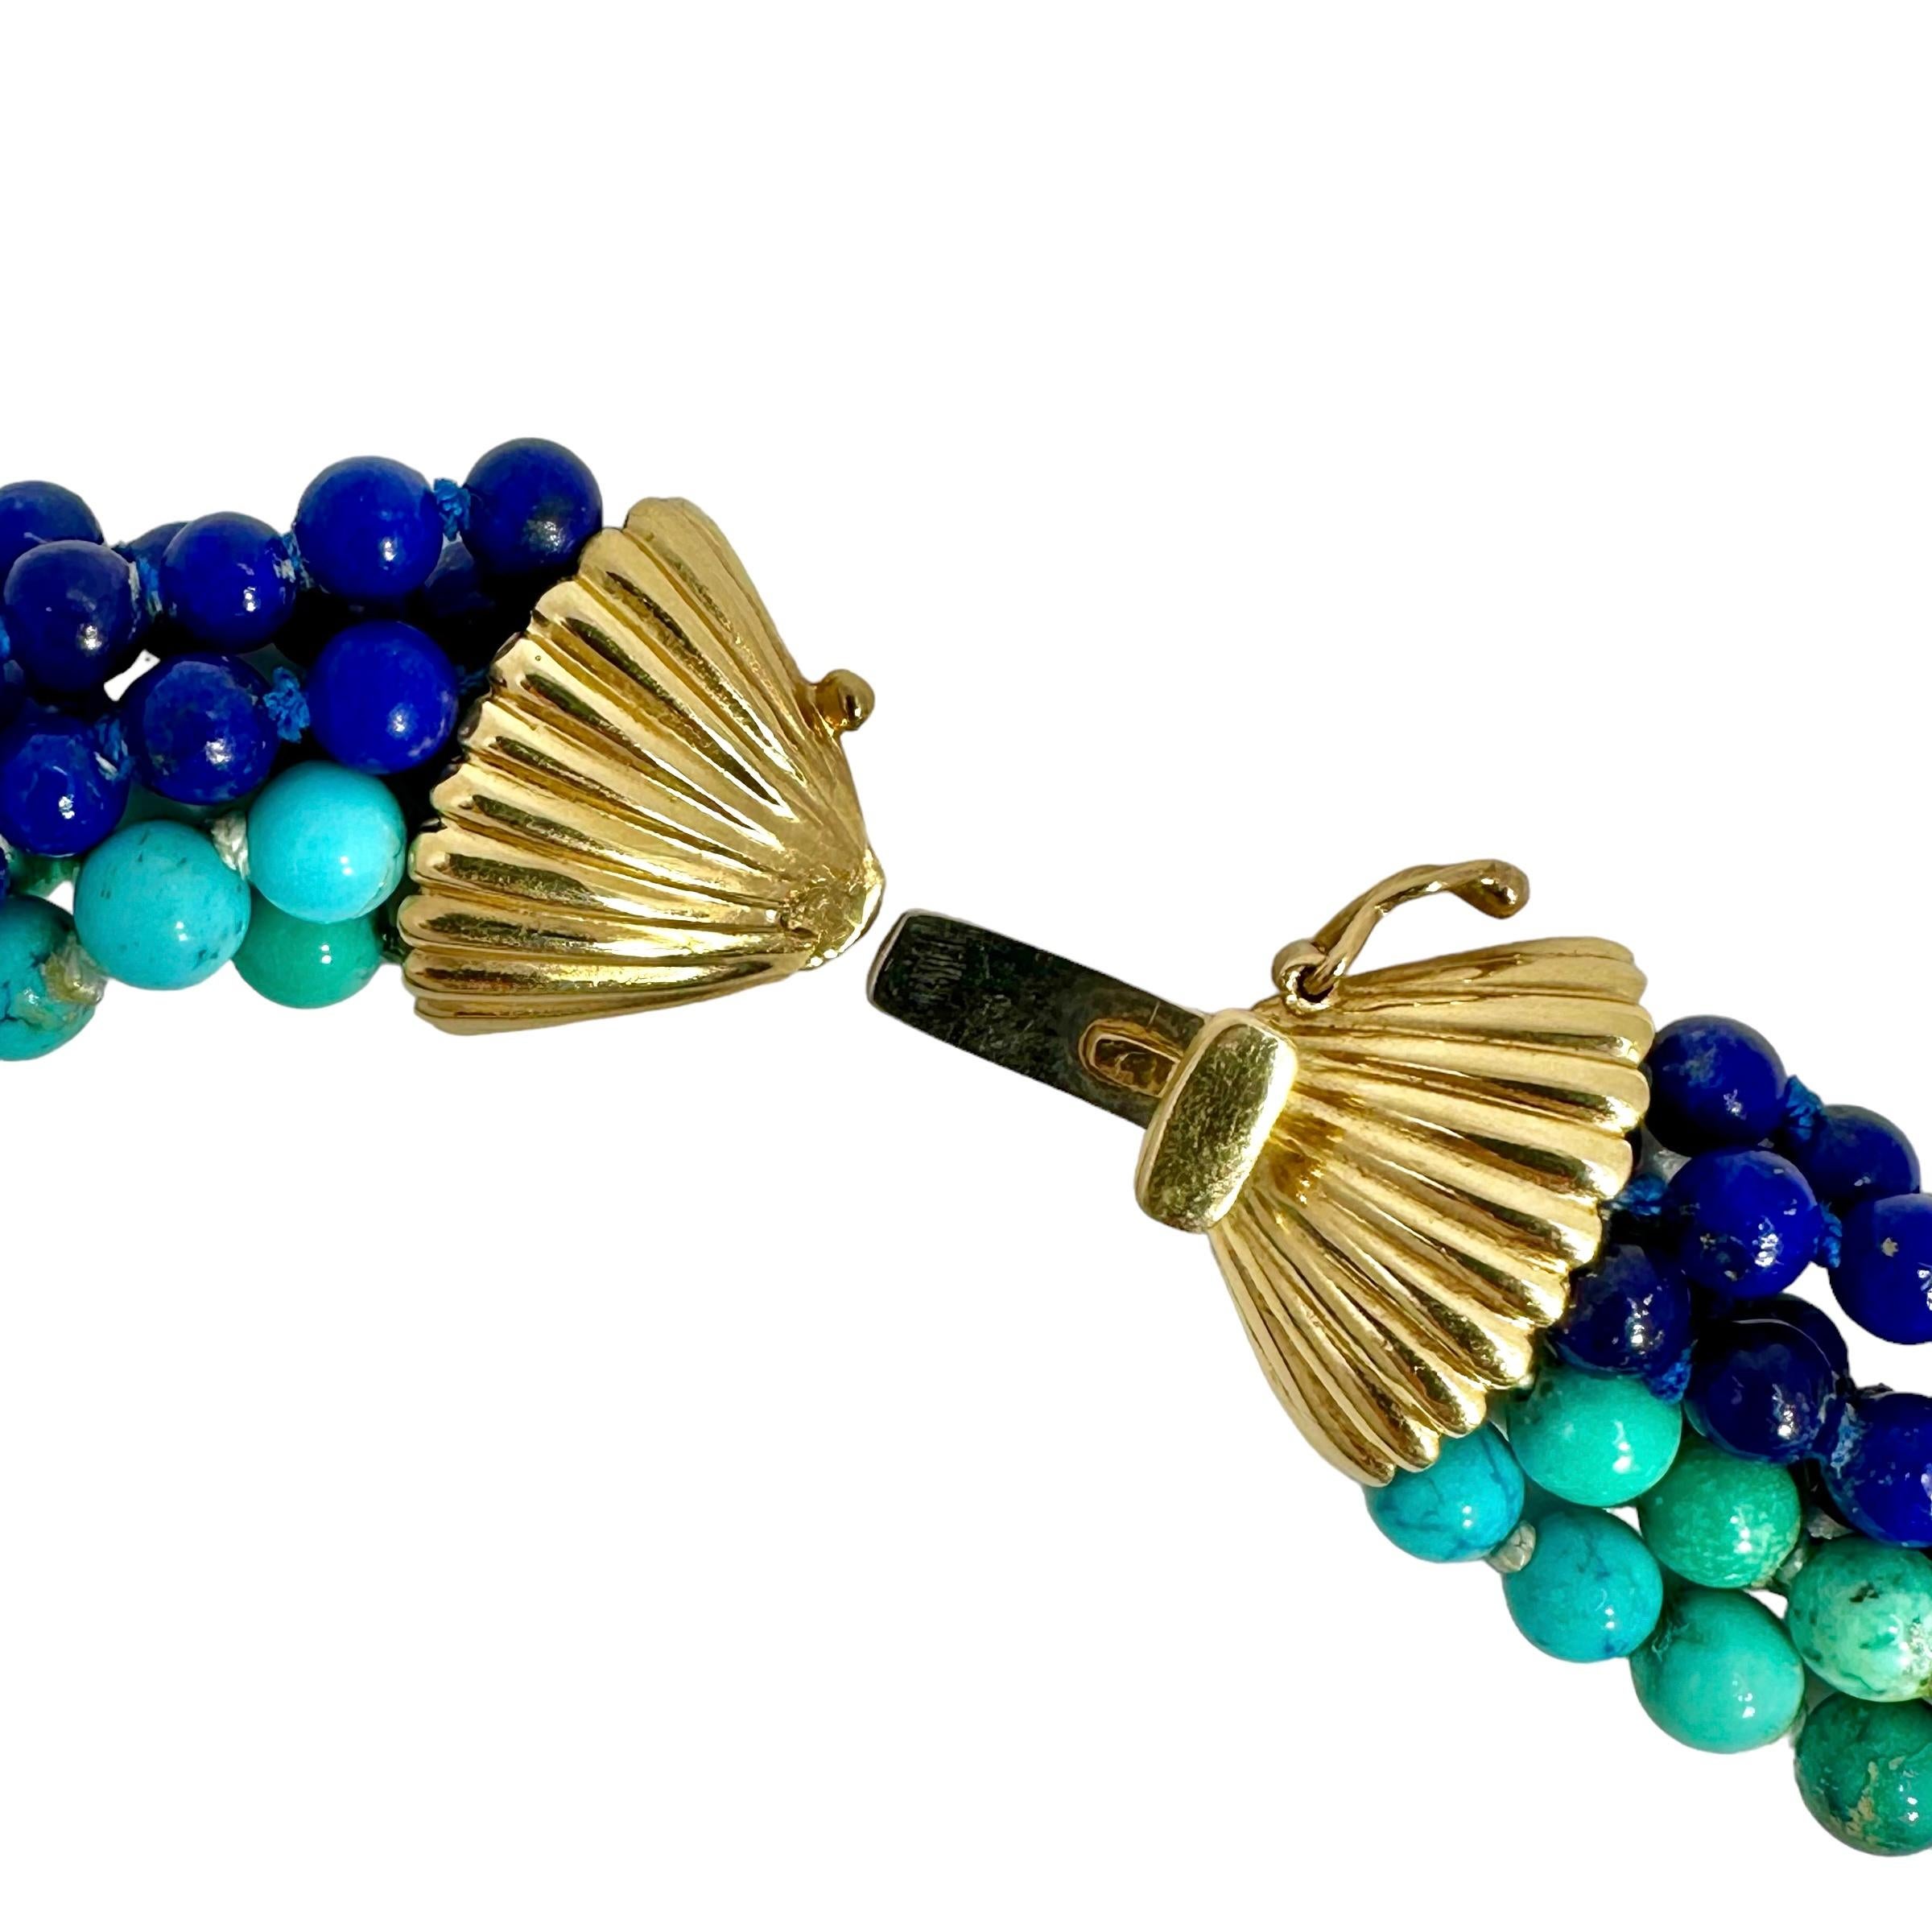 Modern Classic Mid-20th Century Torsade Choker with Lapis, Turquoise and Gold Beads For Sale